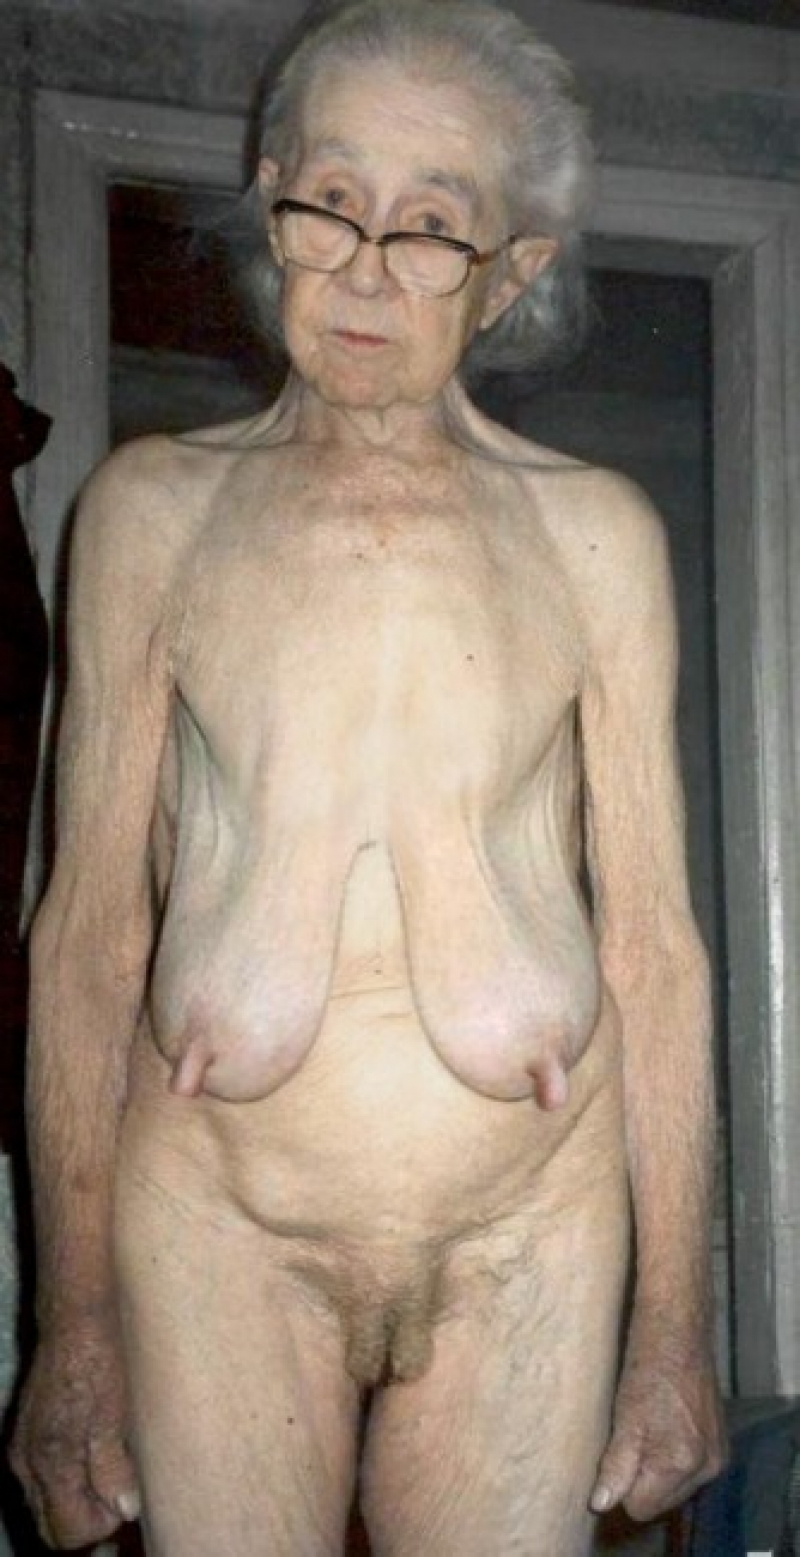 Very old grannies naked